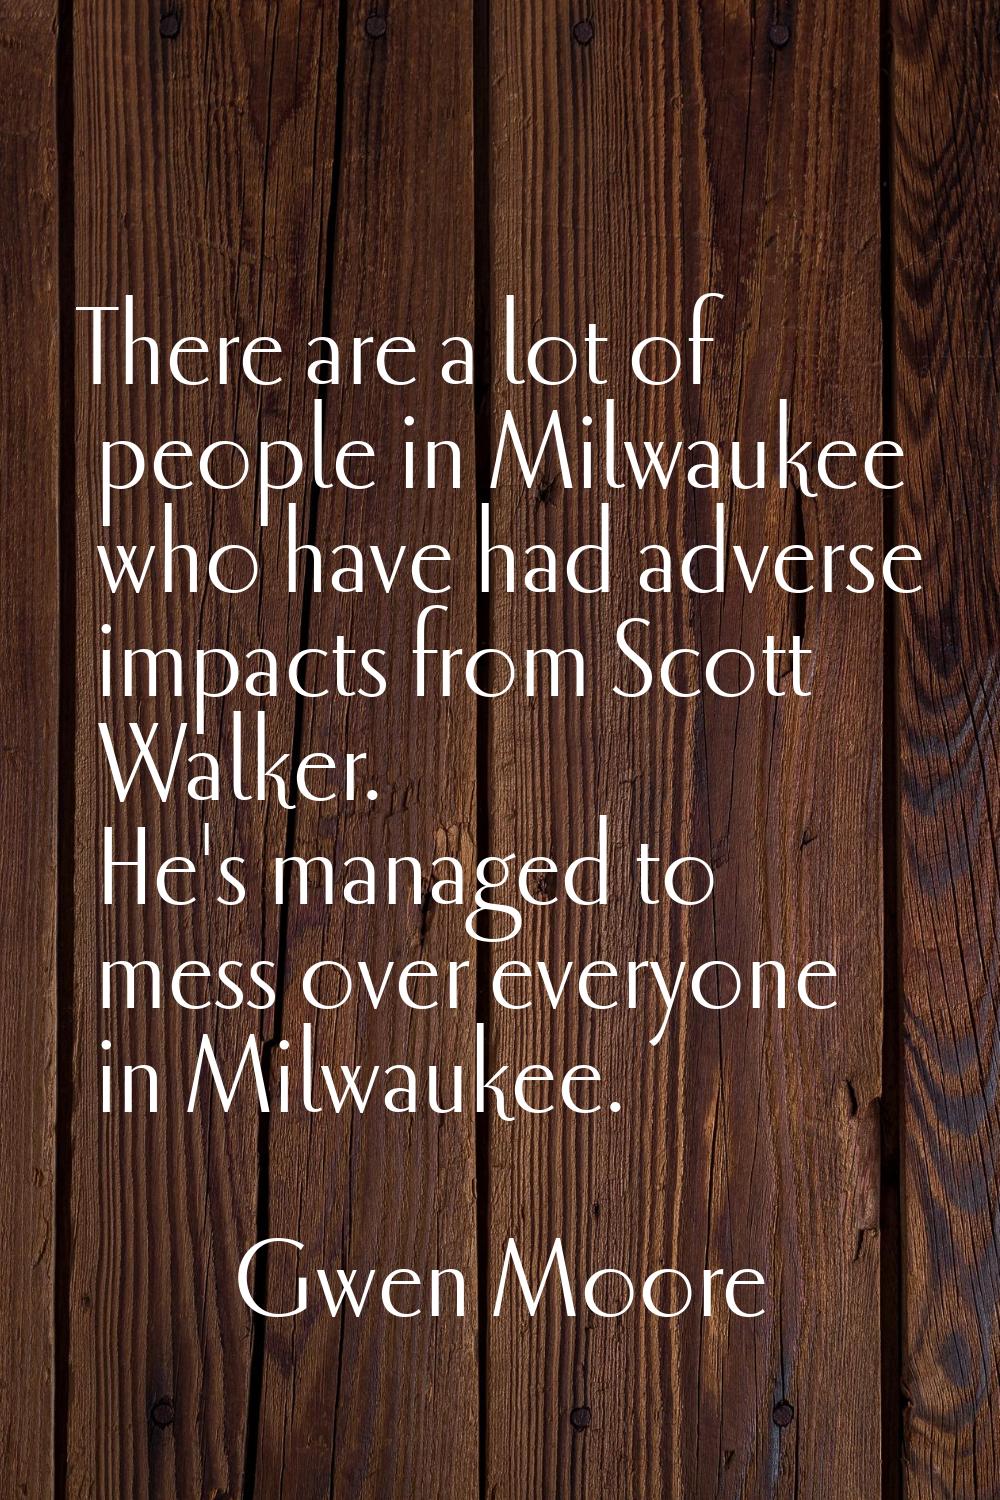 There are a lot of people in Milwaukee who have had adverse impacts from Scott Walker. He's managed